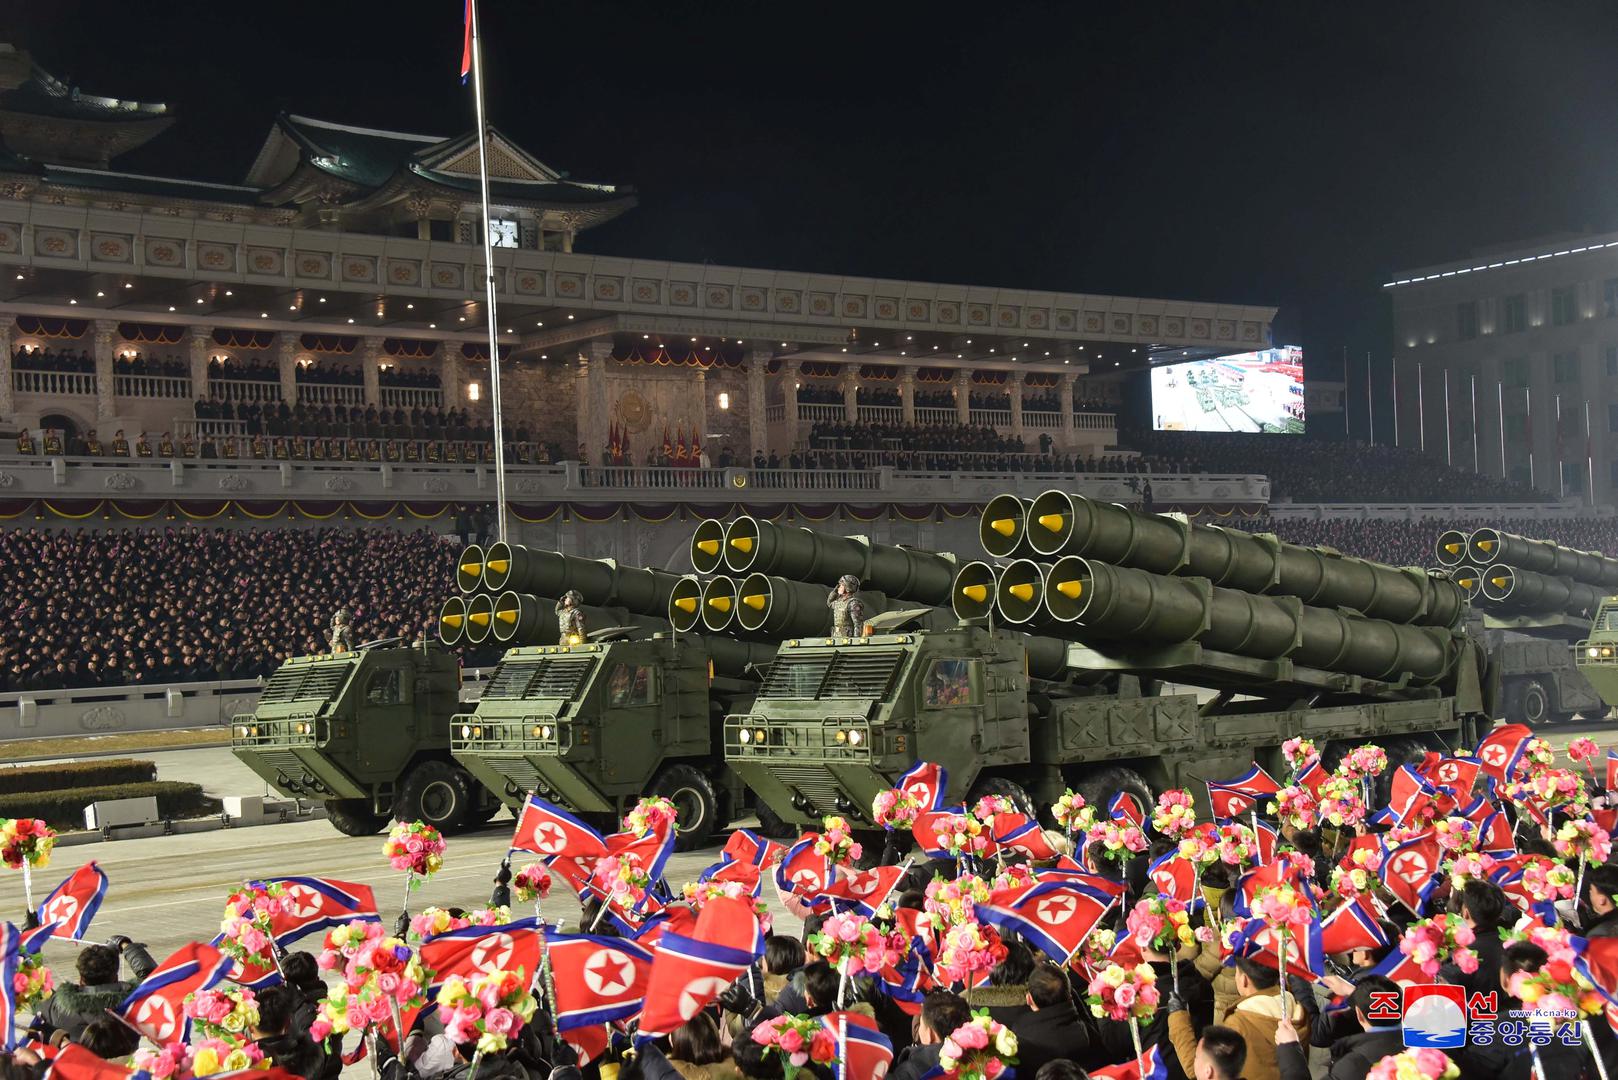 8th Congress of the Workers' Party in Pyongyang Military equipments are seen during a military parade to commemorate the 8th Congress of the Workers' Party in Pyongyang, North Korea January 14, 2021 in this photo supplied by North Korea's Central News Agency (KCNA).    KCNA via REUTERS    ATTENTION EDITORS - THIS IMAGE WAS PROVIDED BY A THIRD PARTY. REUTERS IS UNABLE TO INDEPENDENTLY VERIFY THIS IMAGE. NO THIRD PARTY SALES. SOUTH KOREA OUT. NO COMMERCIAL OR EDITORIAL SALES IN SOUTH KOREA. KCNA